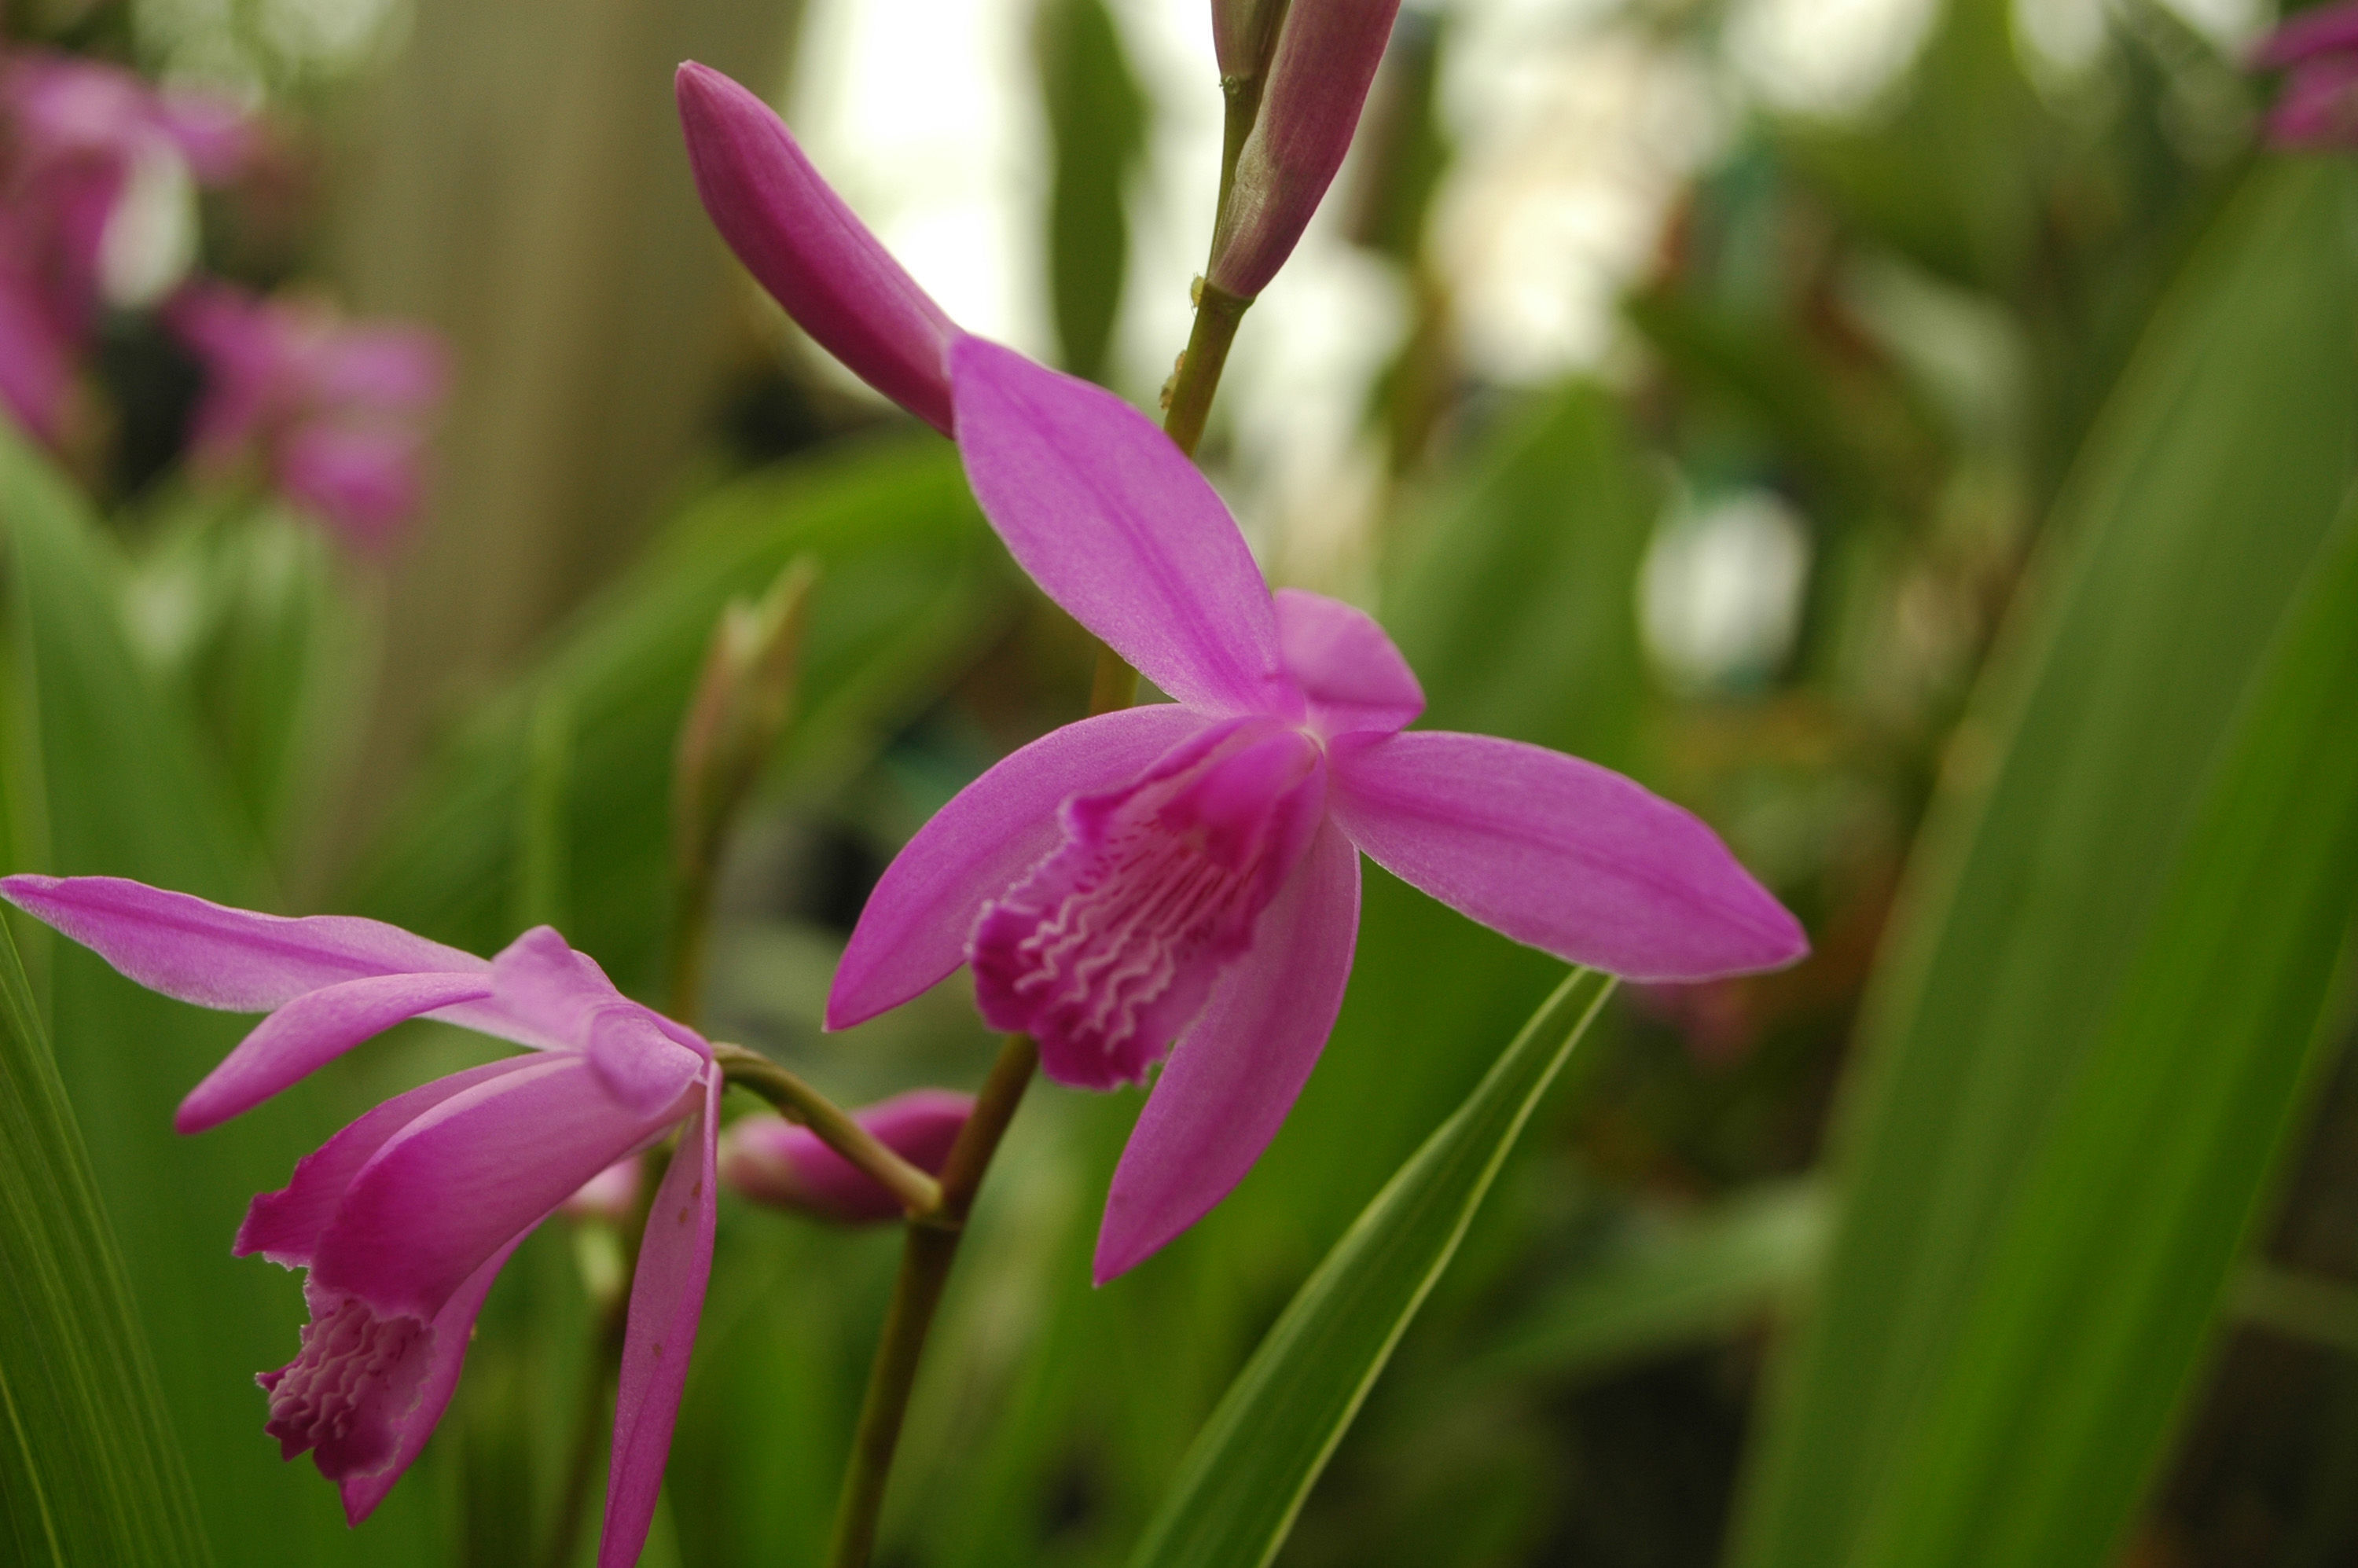 Image of Urn orchids